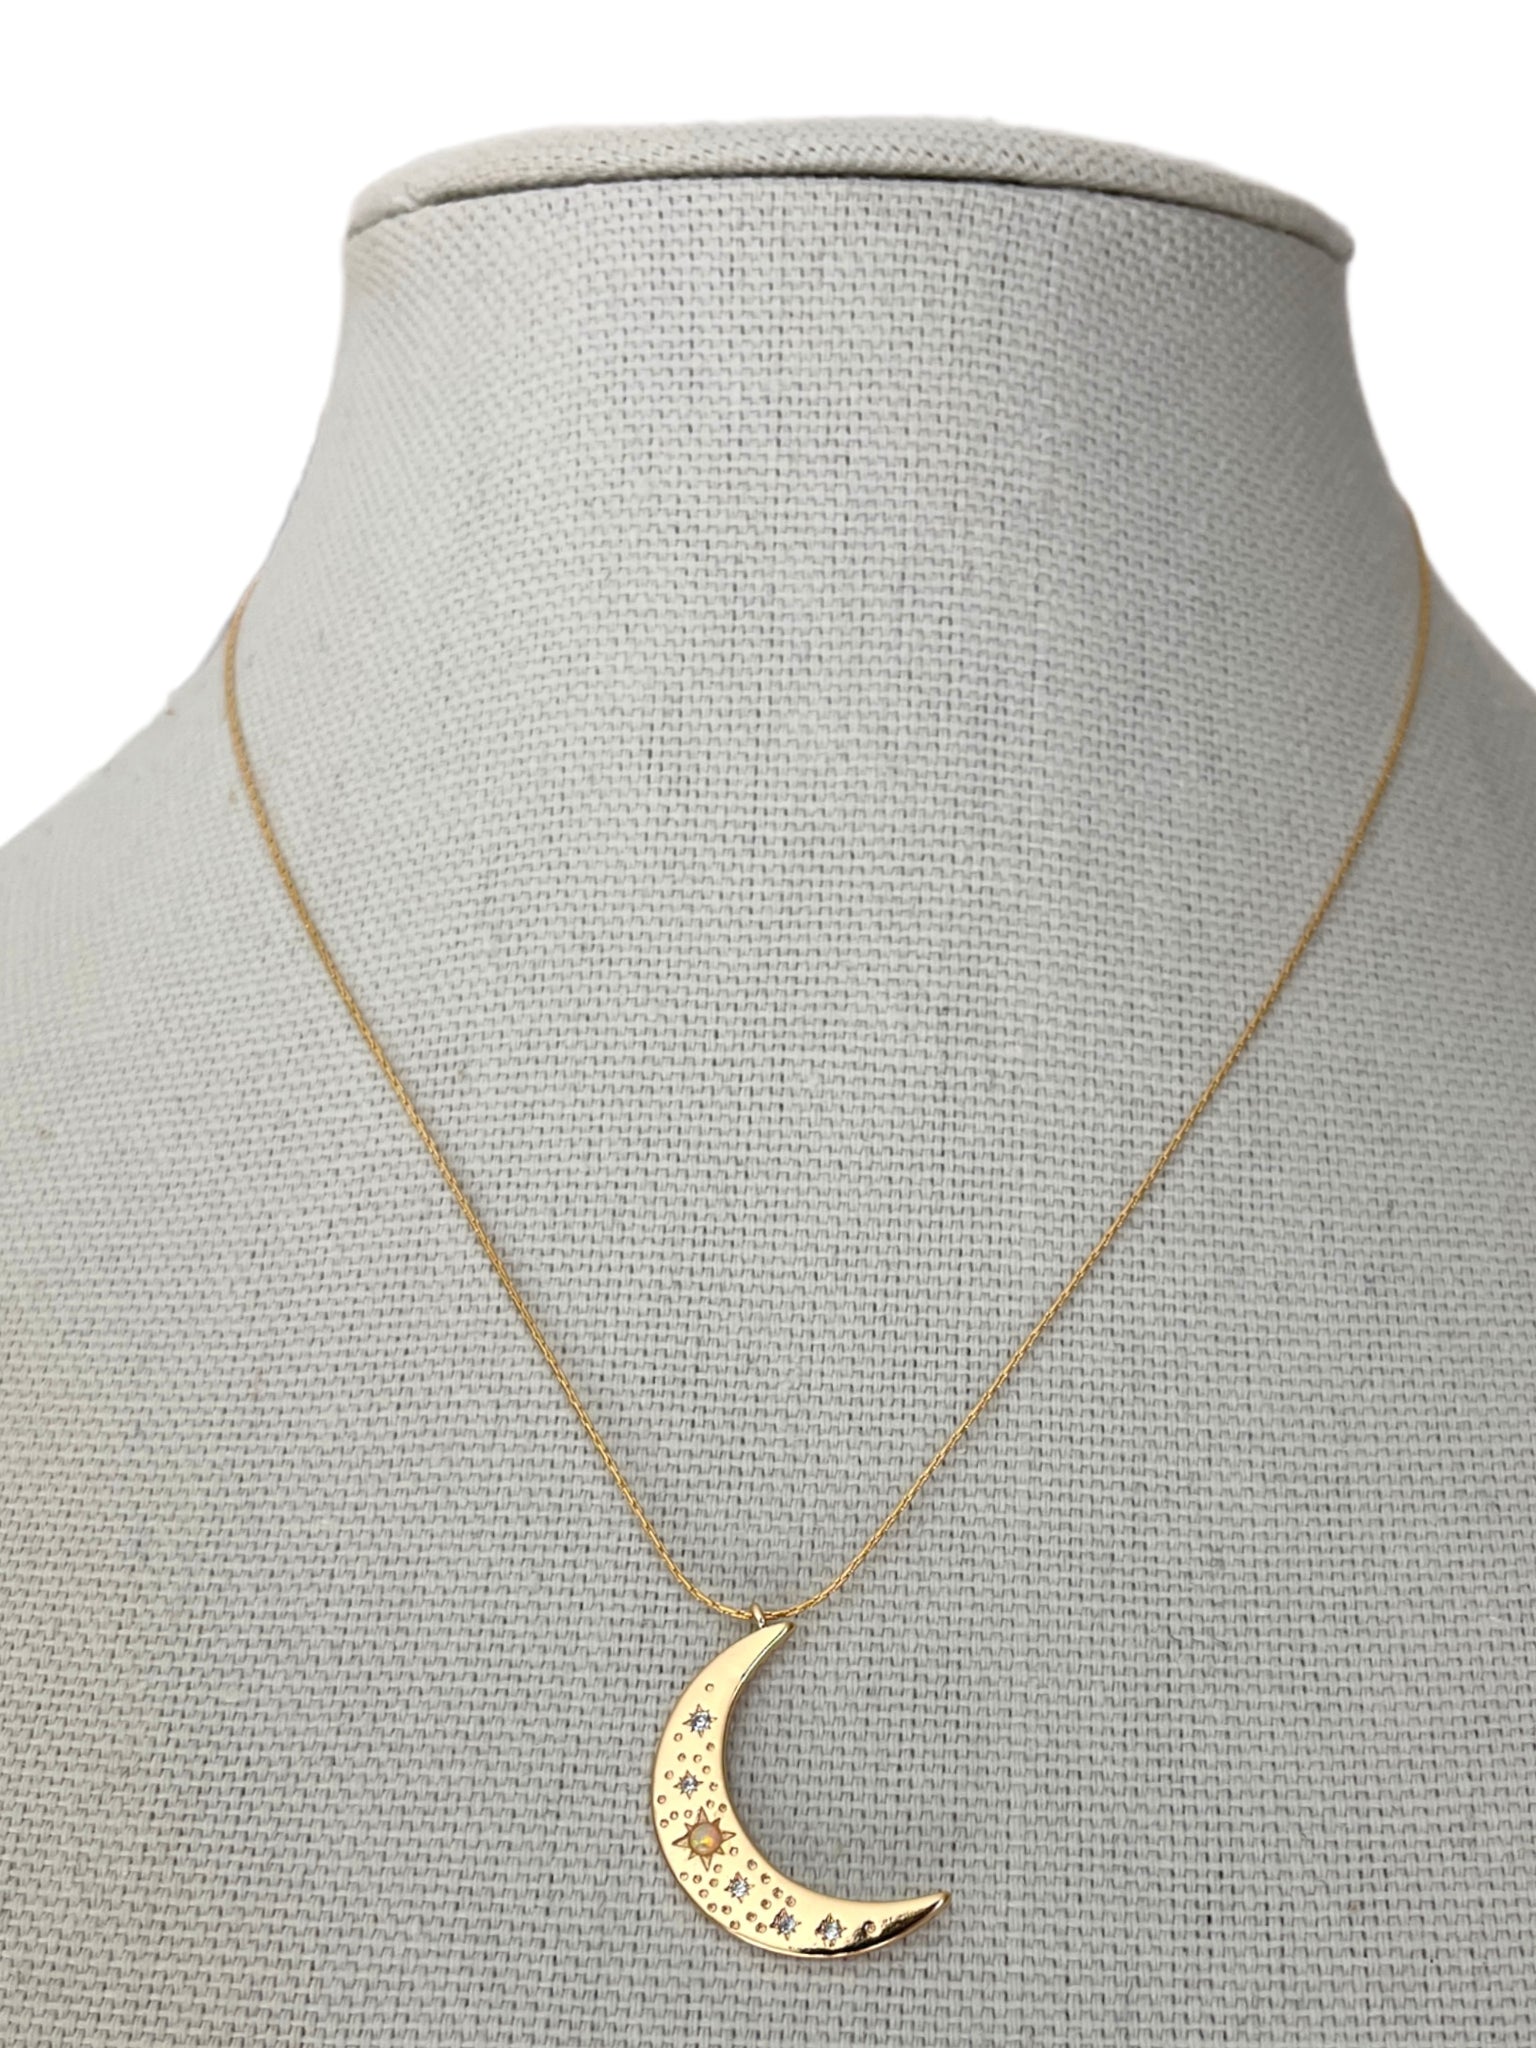 9Ct Gold Crescent Moon Necklace, 18 Inch